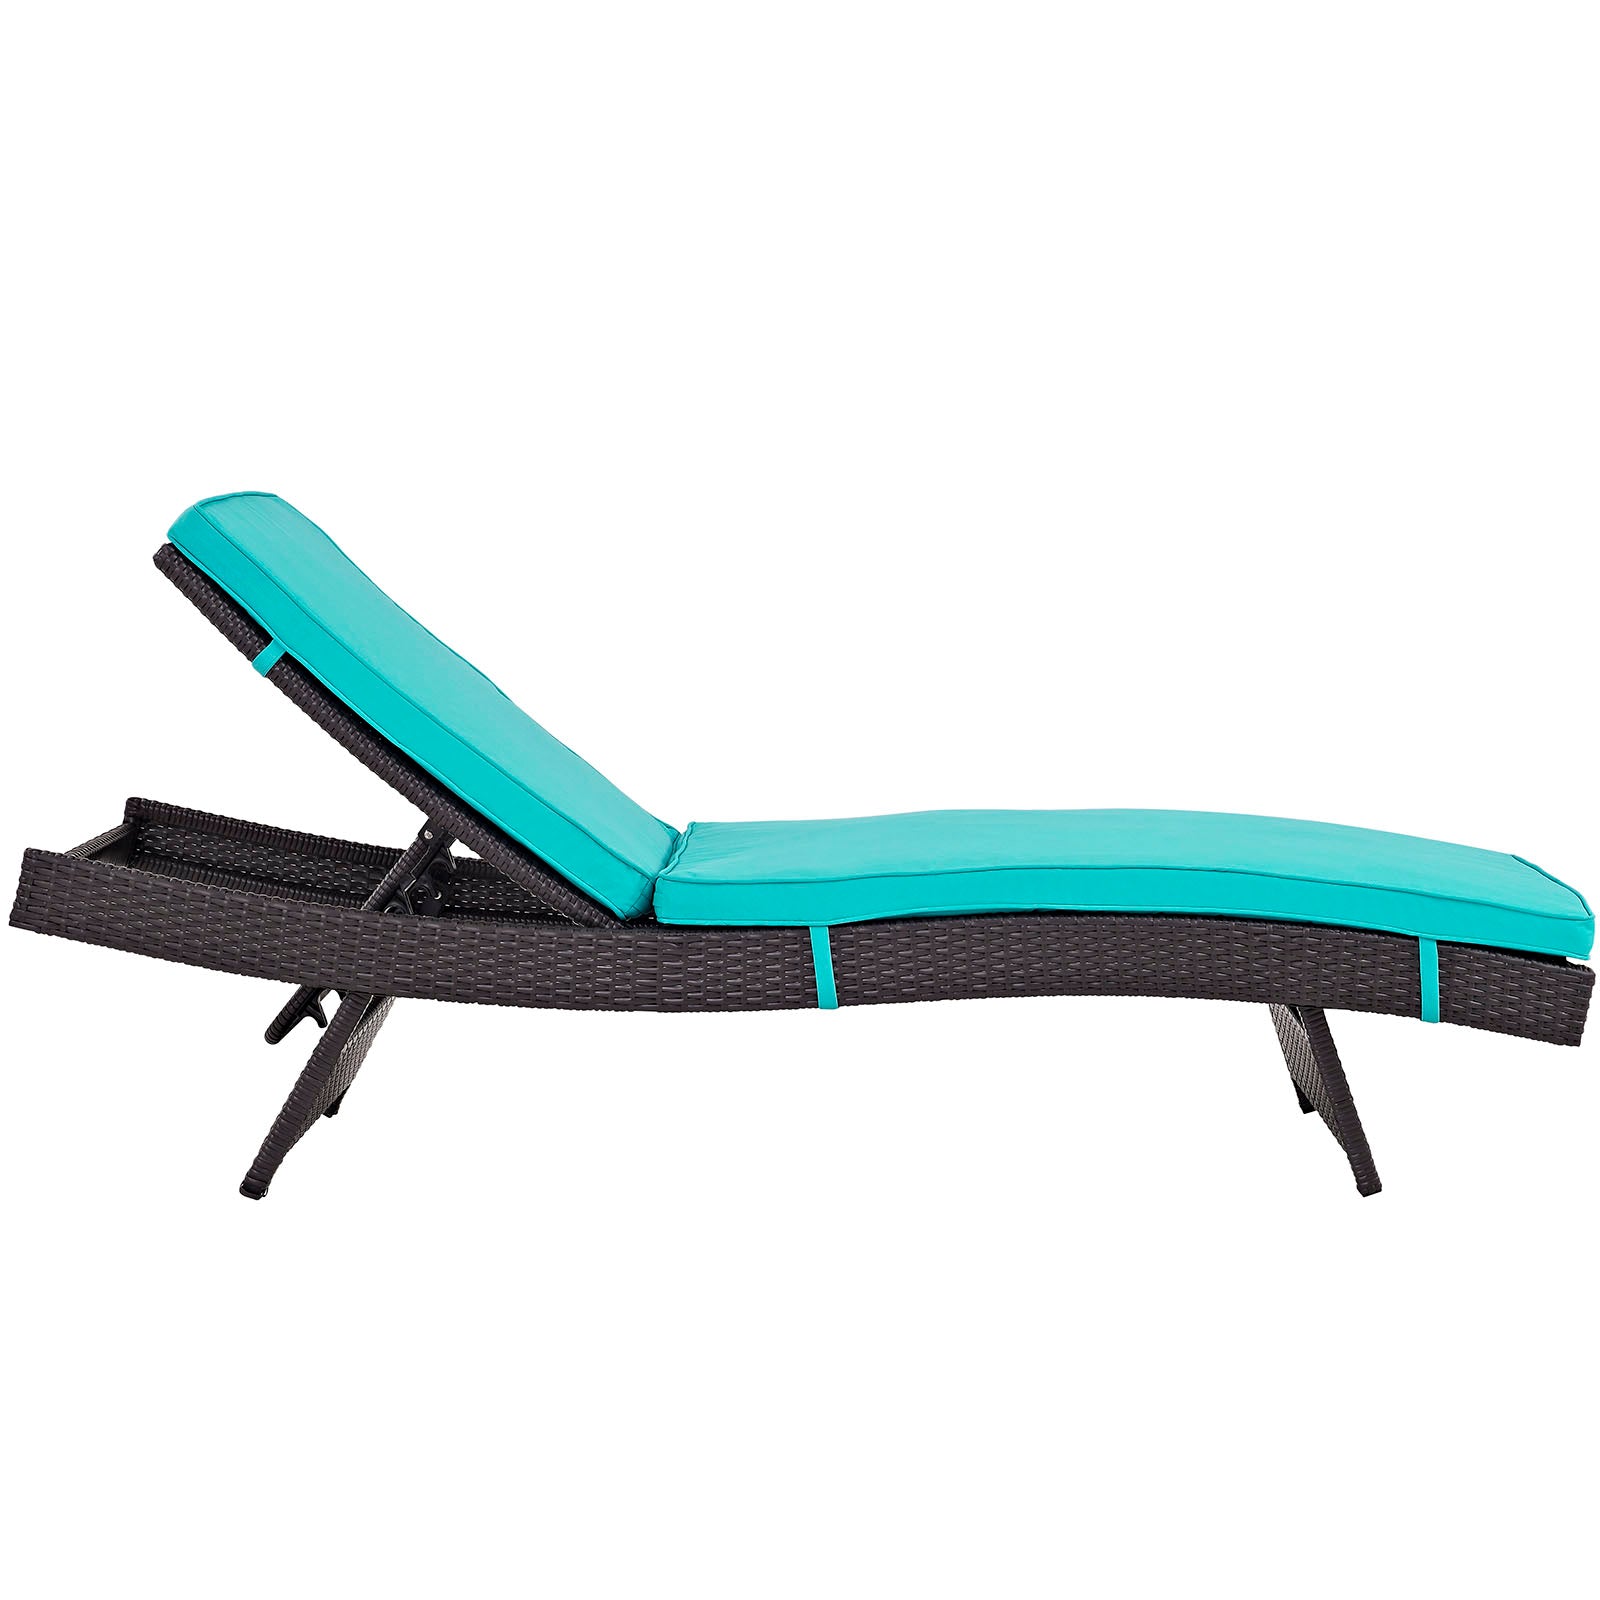 Modway Outdoor Loungers - Convene Chaise Outdoor Patio Espresso & Turquoise (Set Of 6)